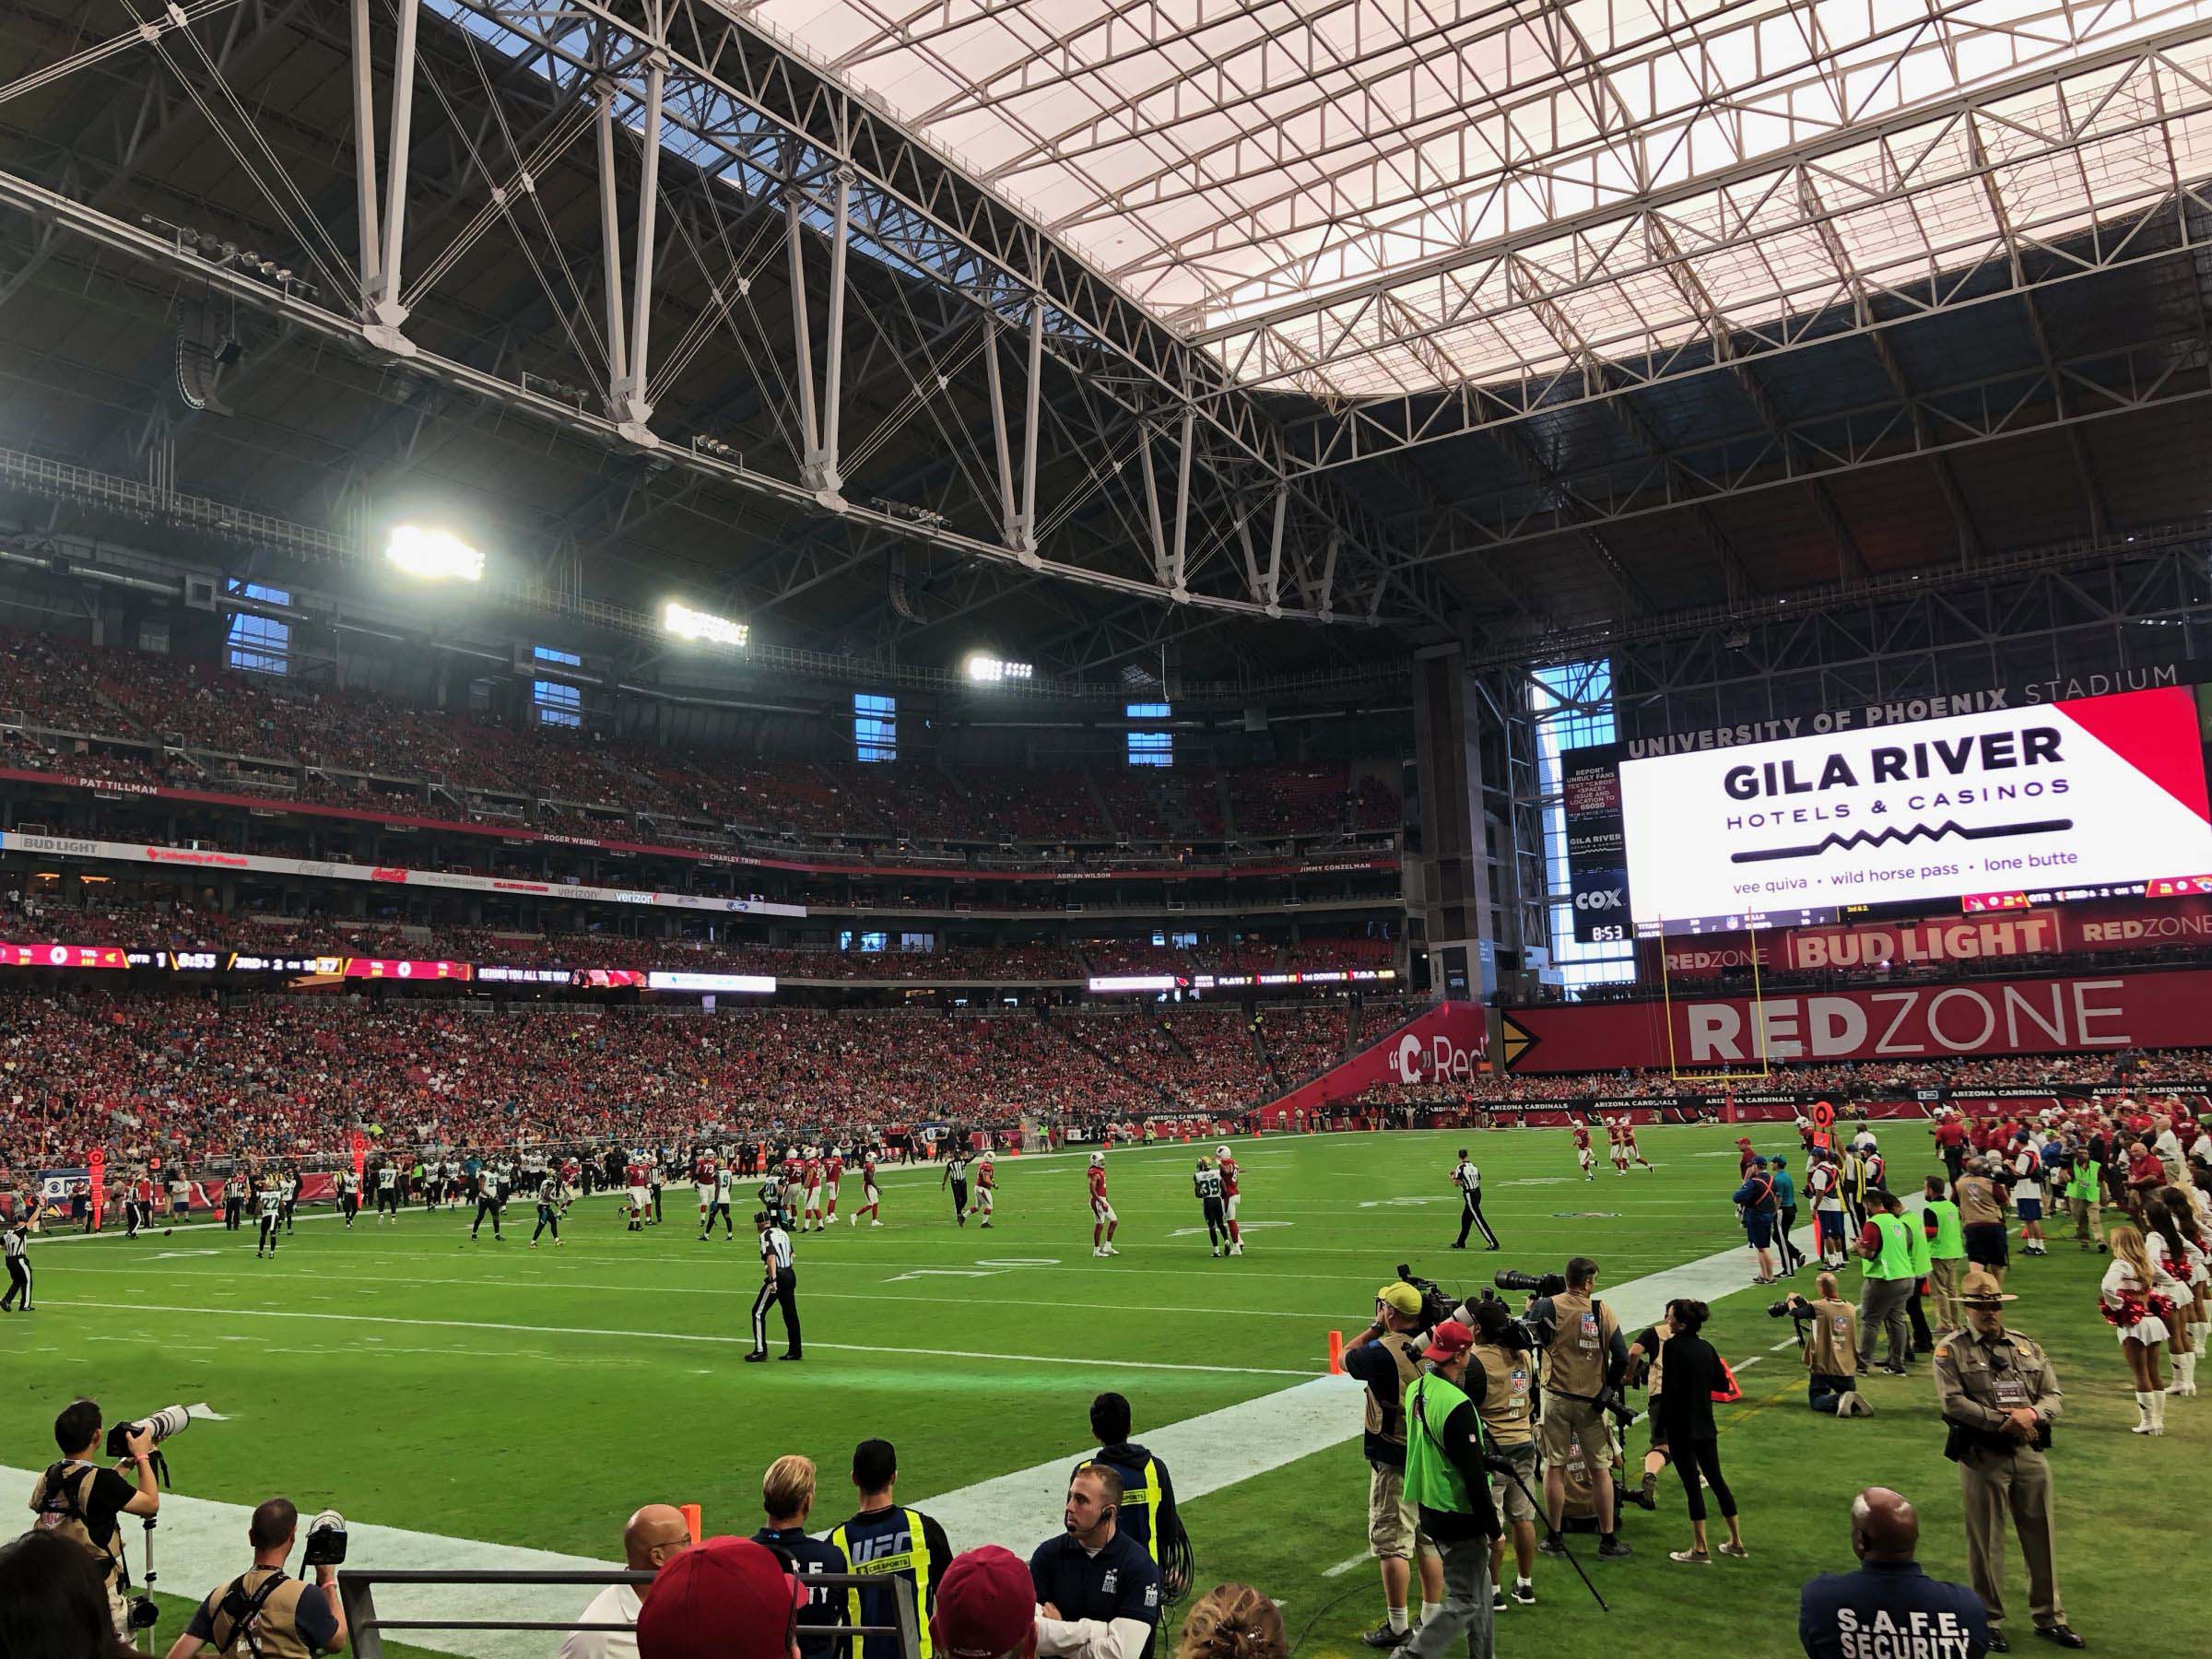 Section 115 at State Farm Stadium - RateYourSeats.com